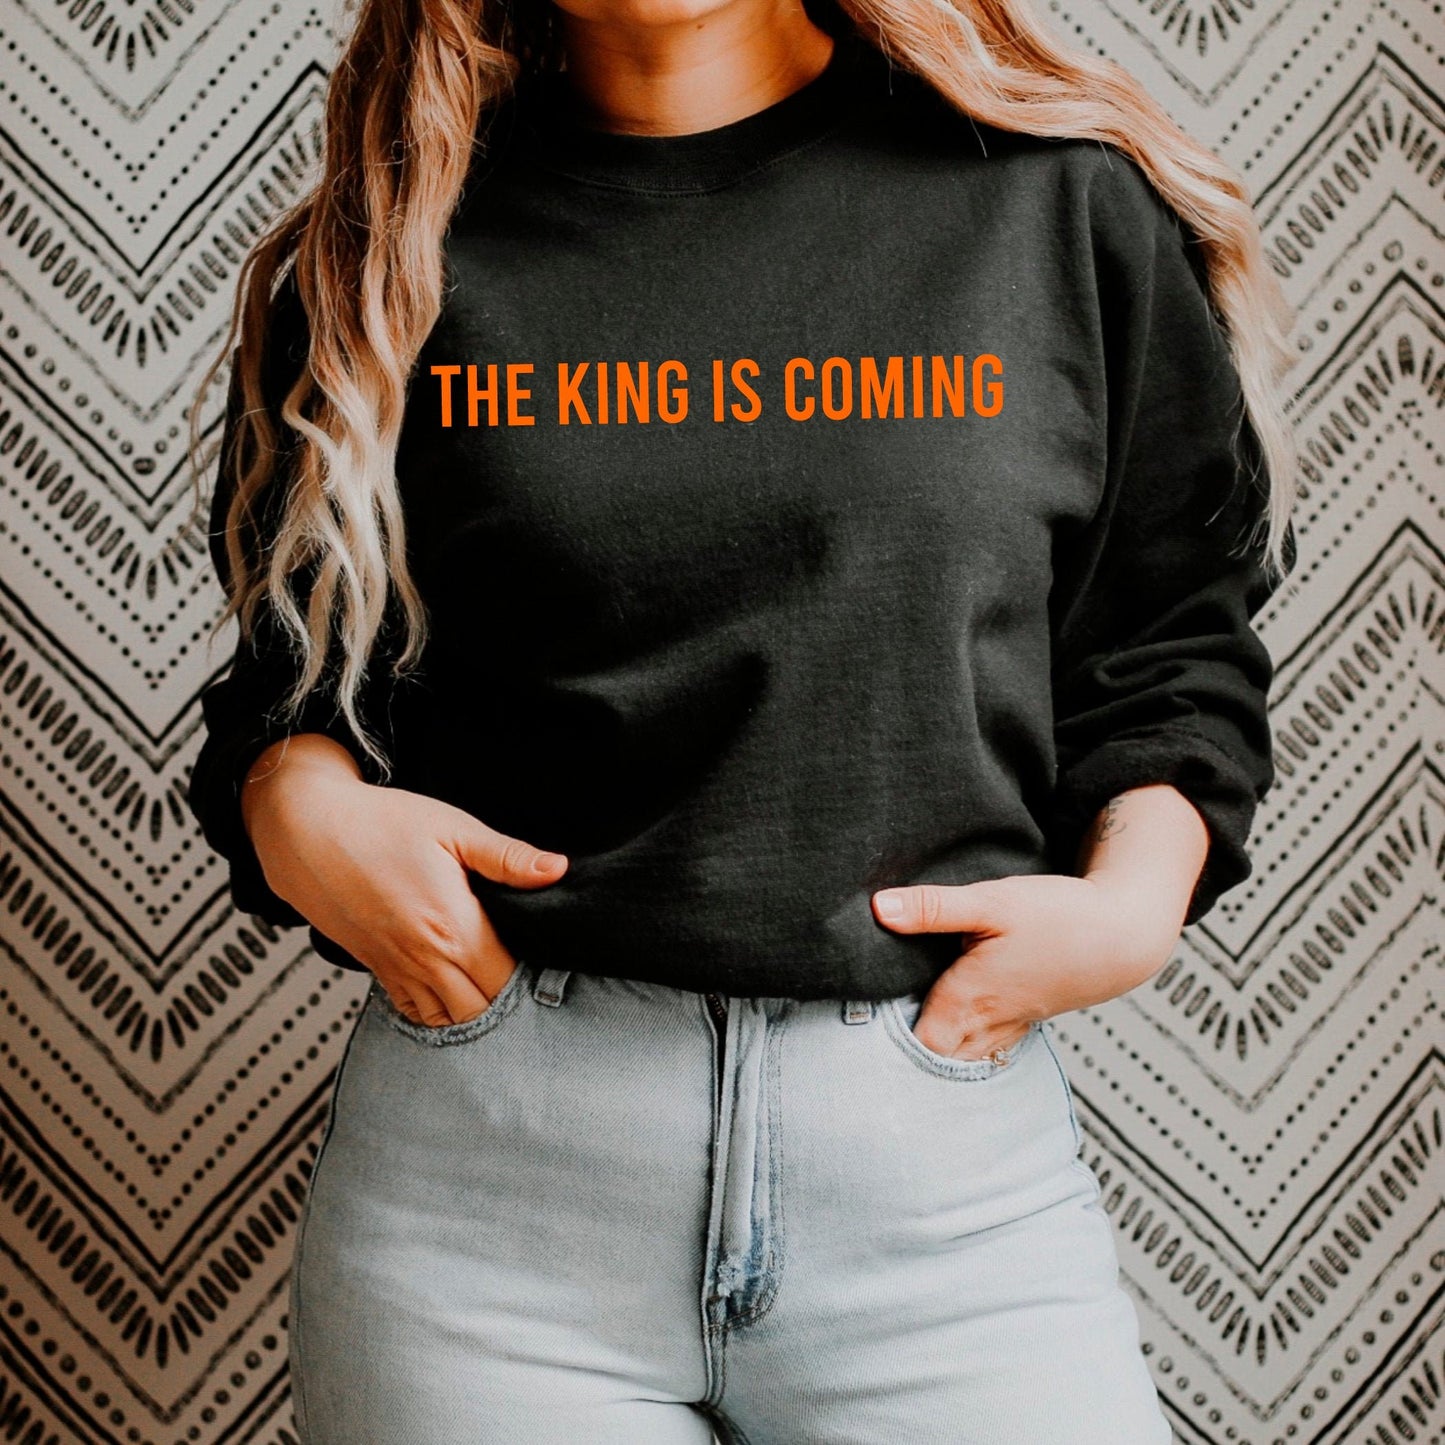 King is Coming T-Shirt - Christian Apparel - Jesus is King -  Faith Clothing - Christian T-Shirt - Fall Apareal